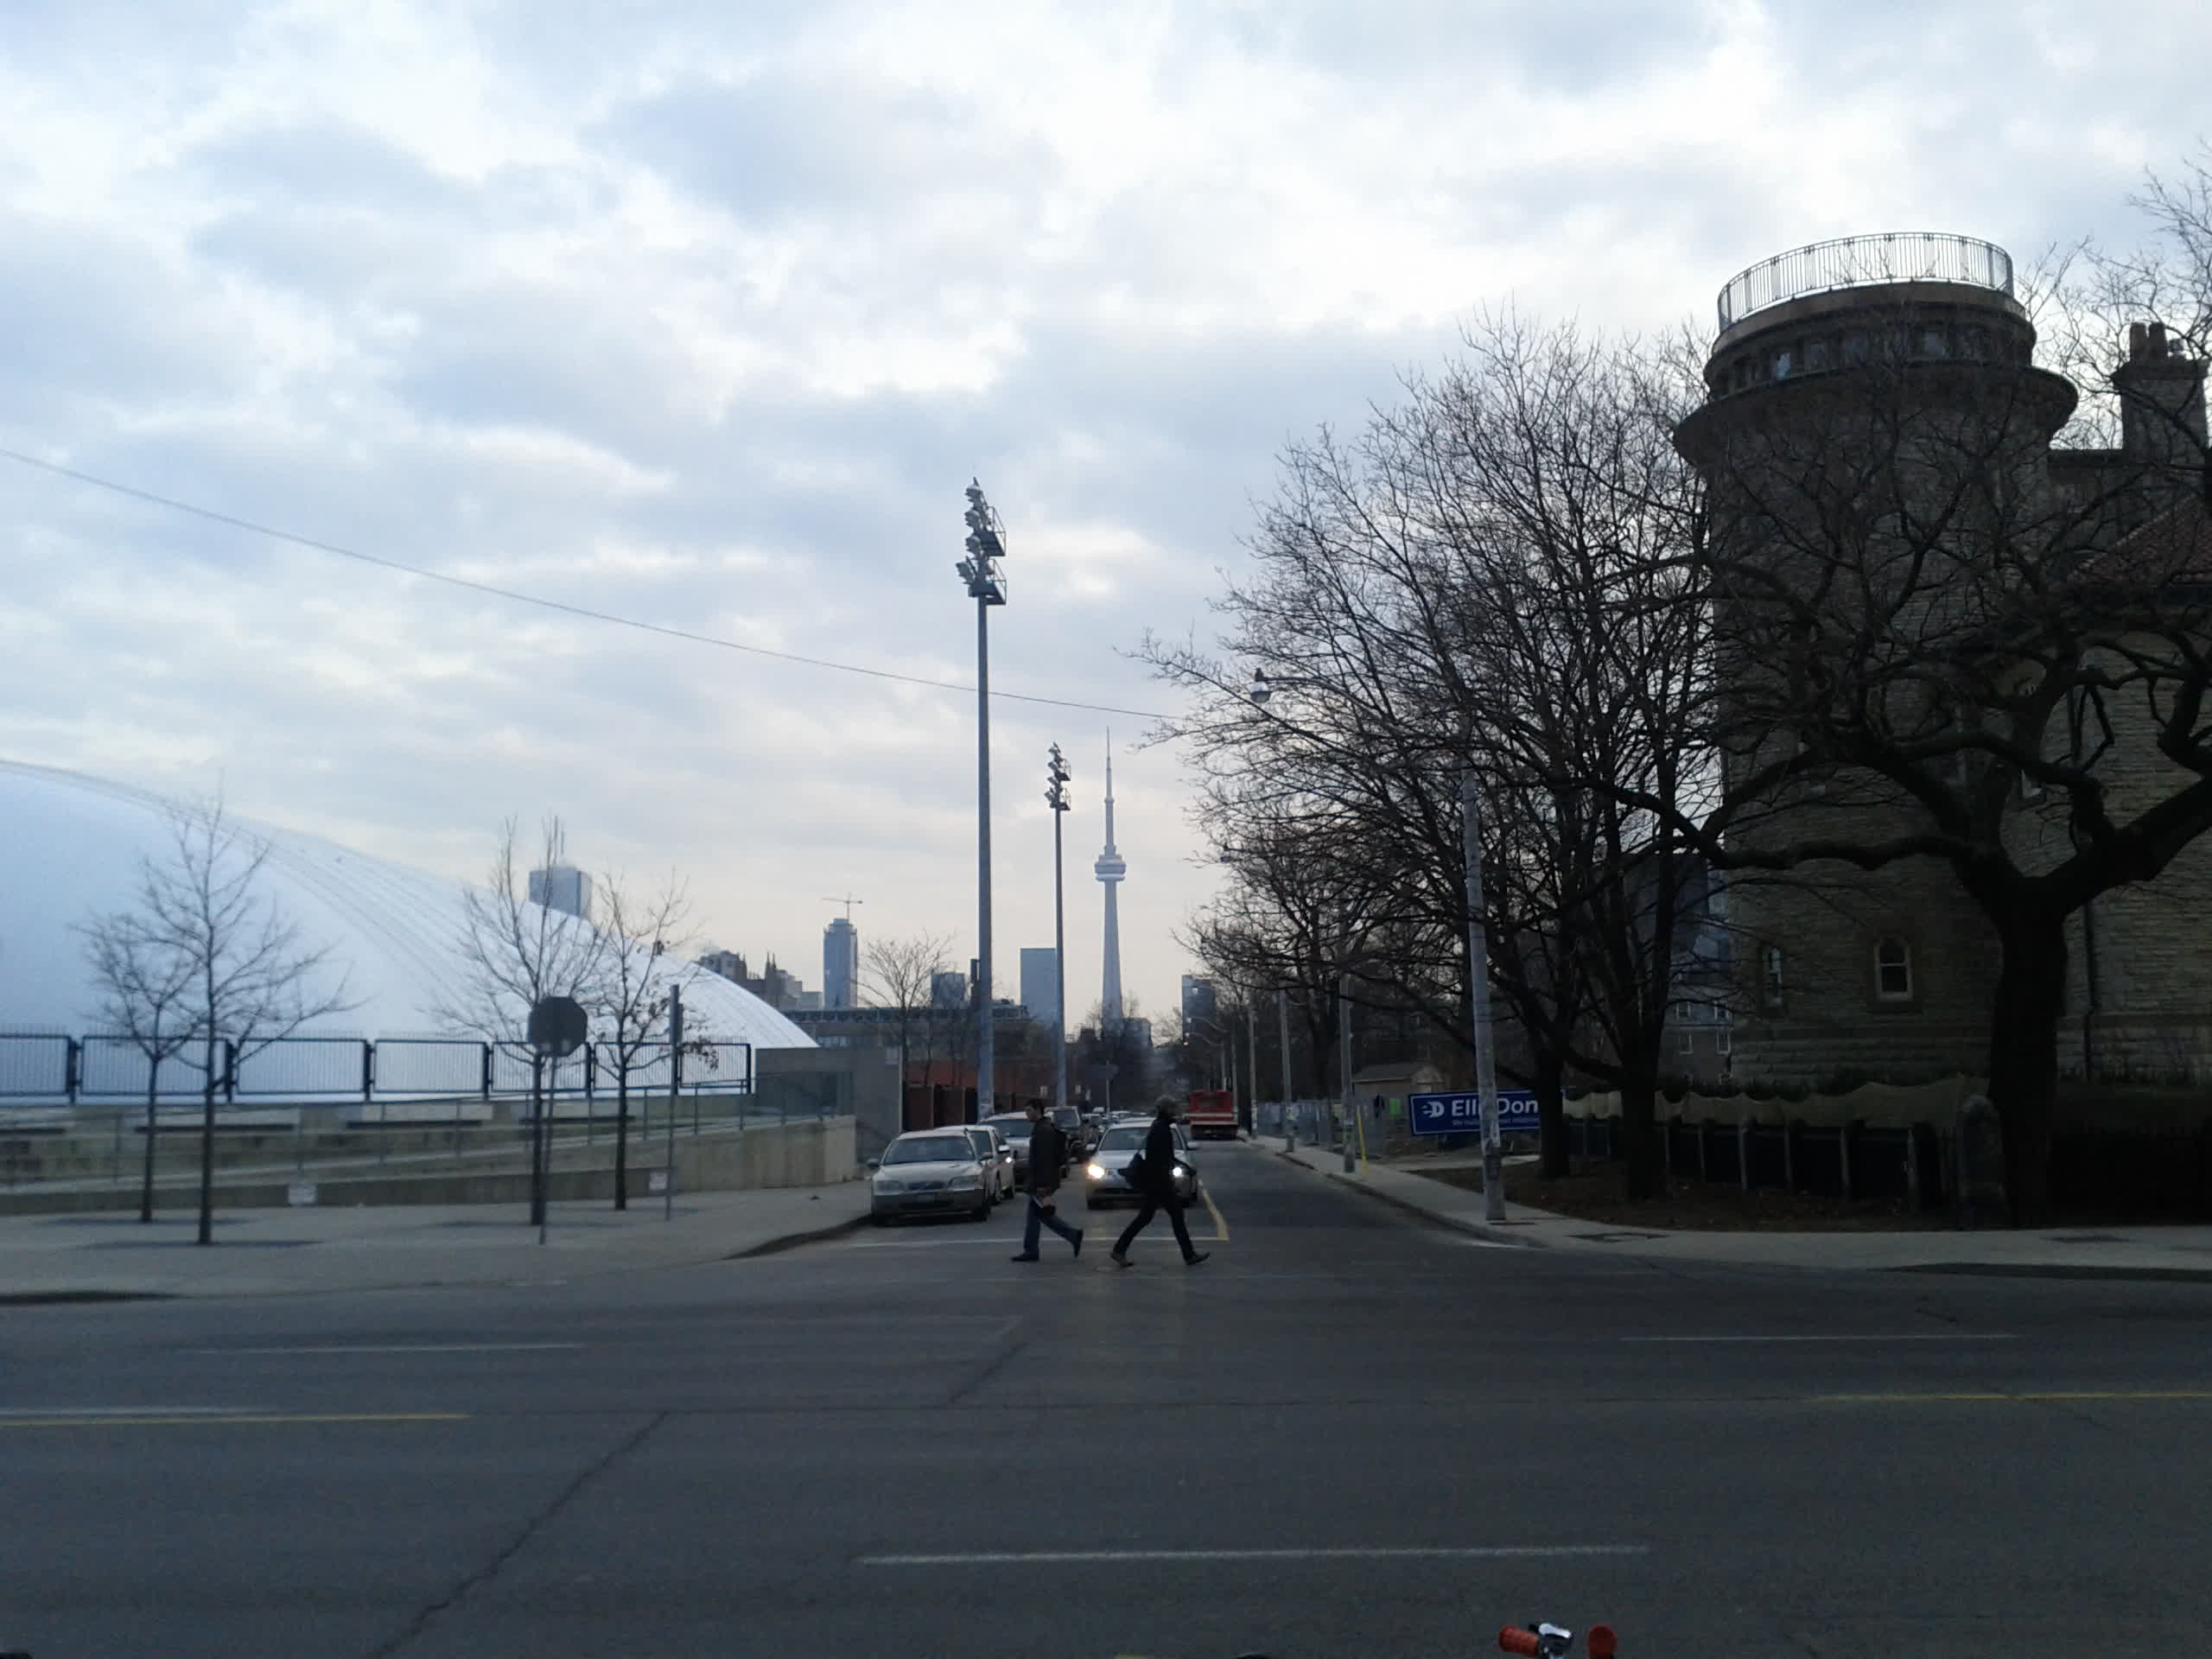 Another shot of CN Tower. This is taken from the far edge of campus.